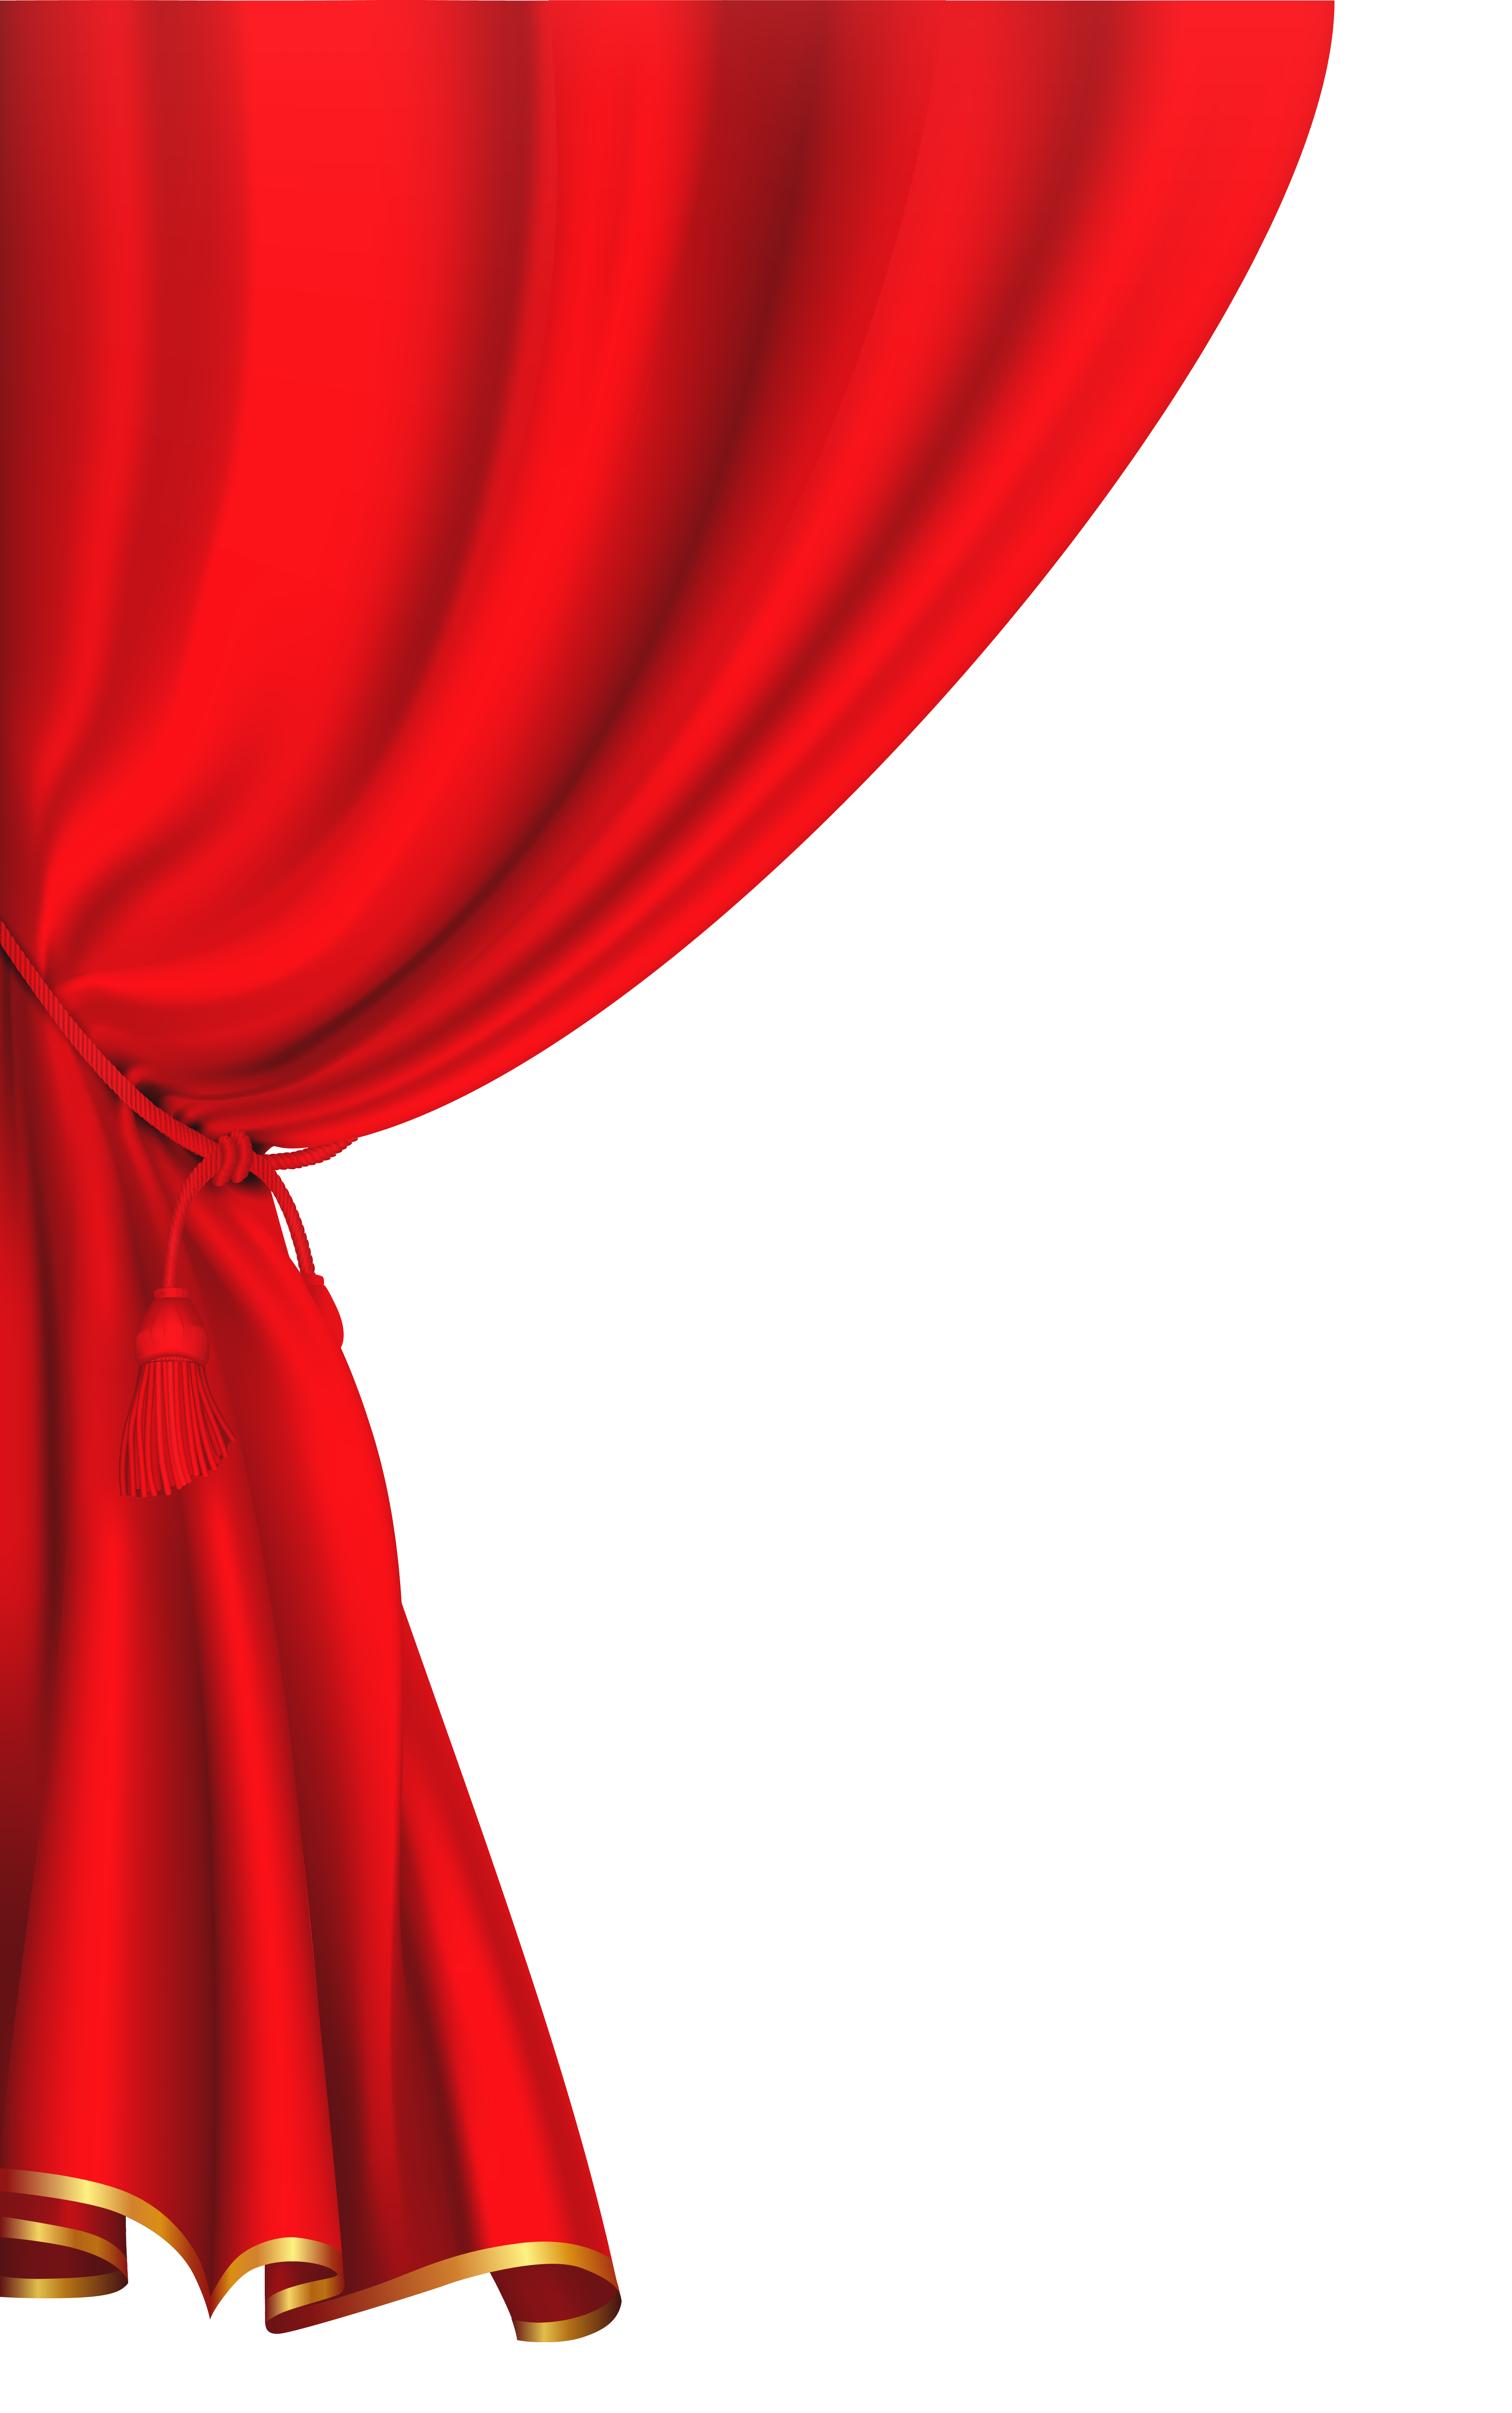 Red curtain image buda. Heaven clipart street